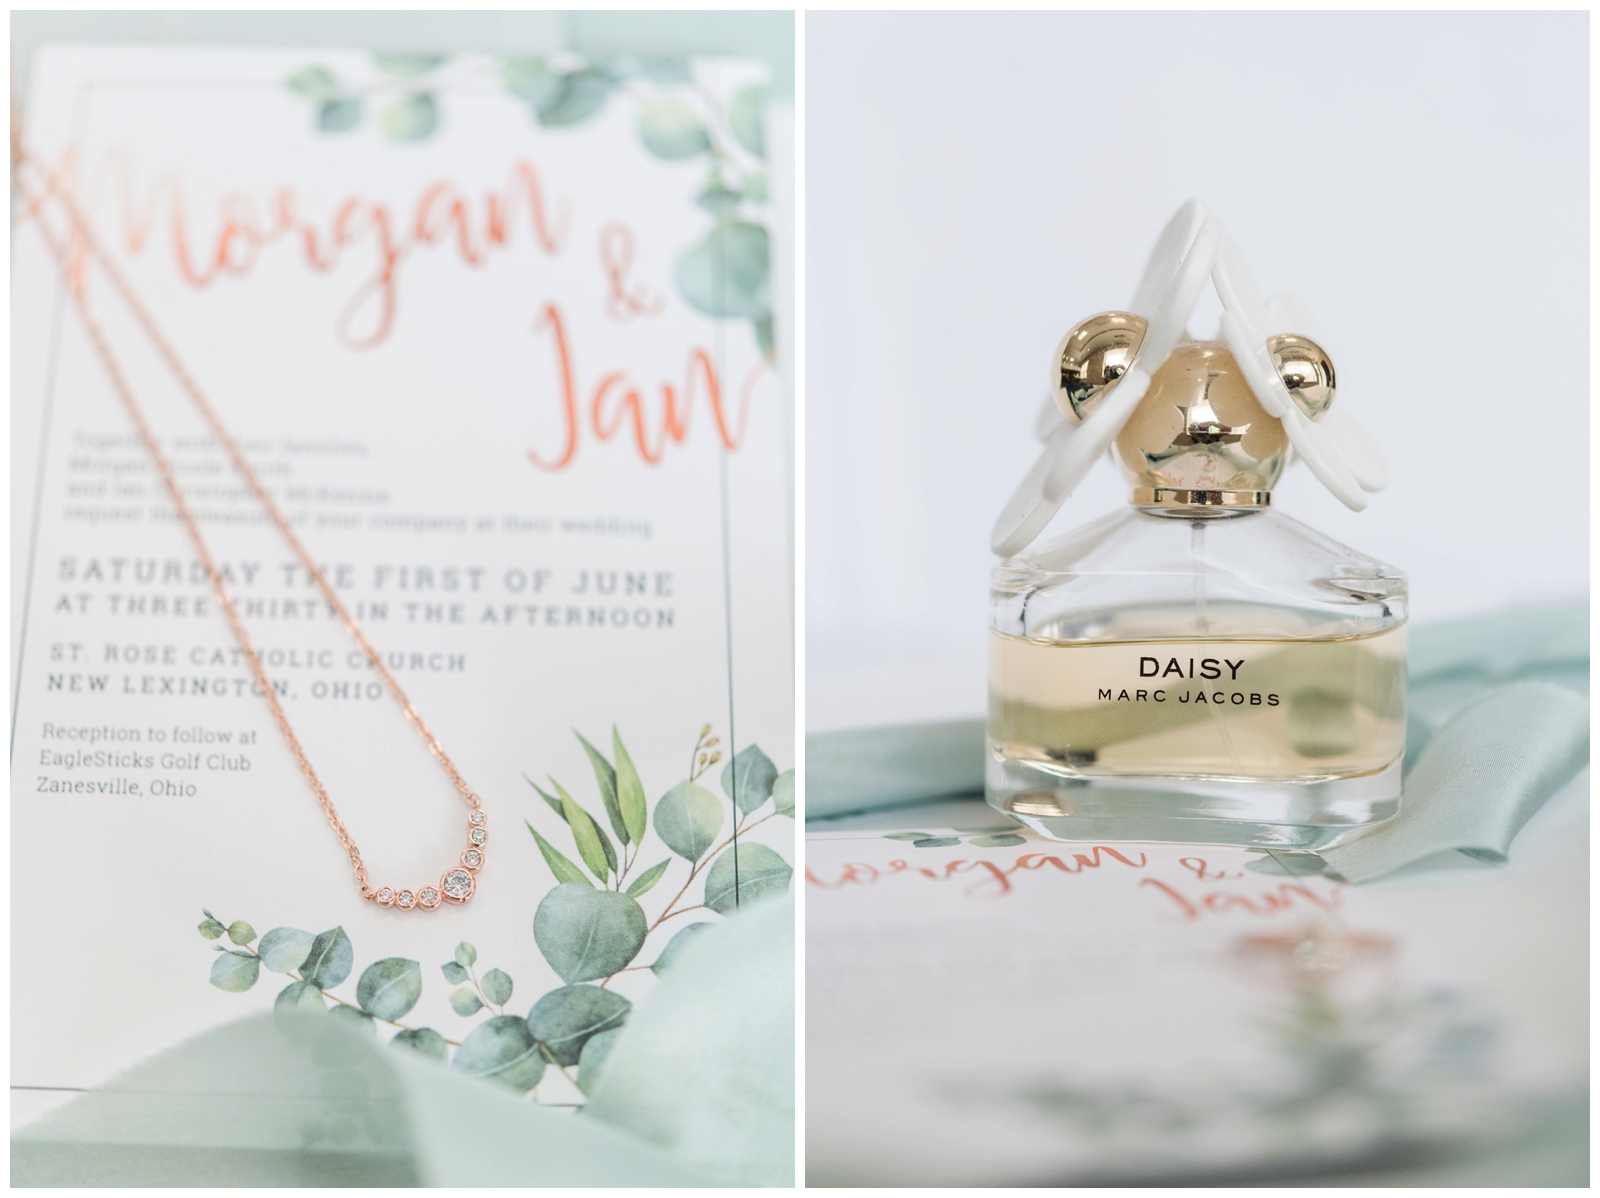 stationery with greenery and Daisy Marc Jacobs perfume bottle photographed by Pipers Photography